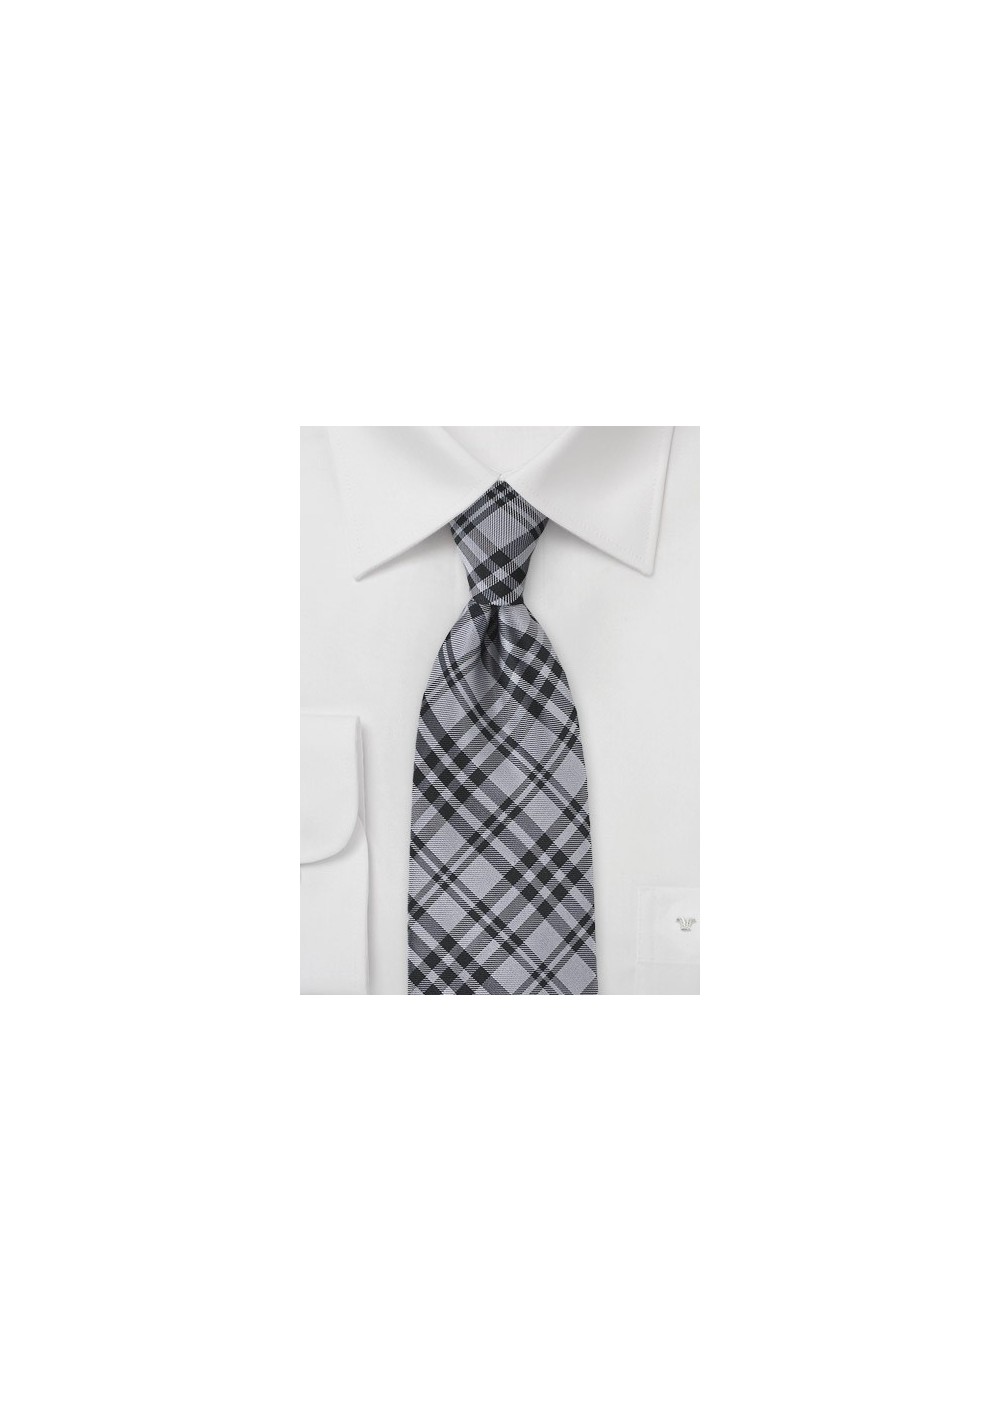 XL Length Plaid Tie in Black and Charcoal